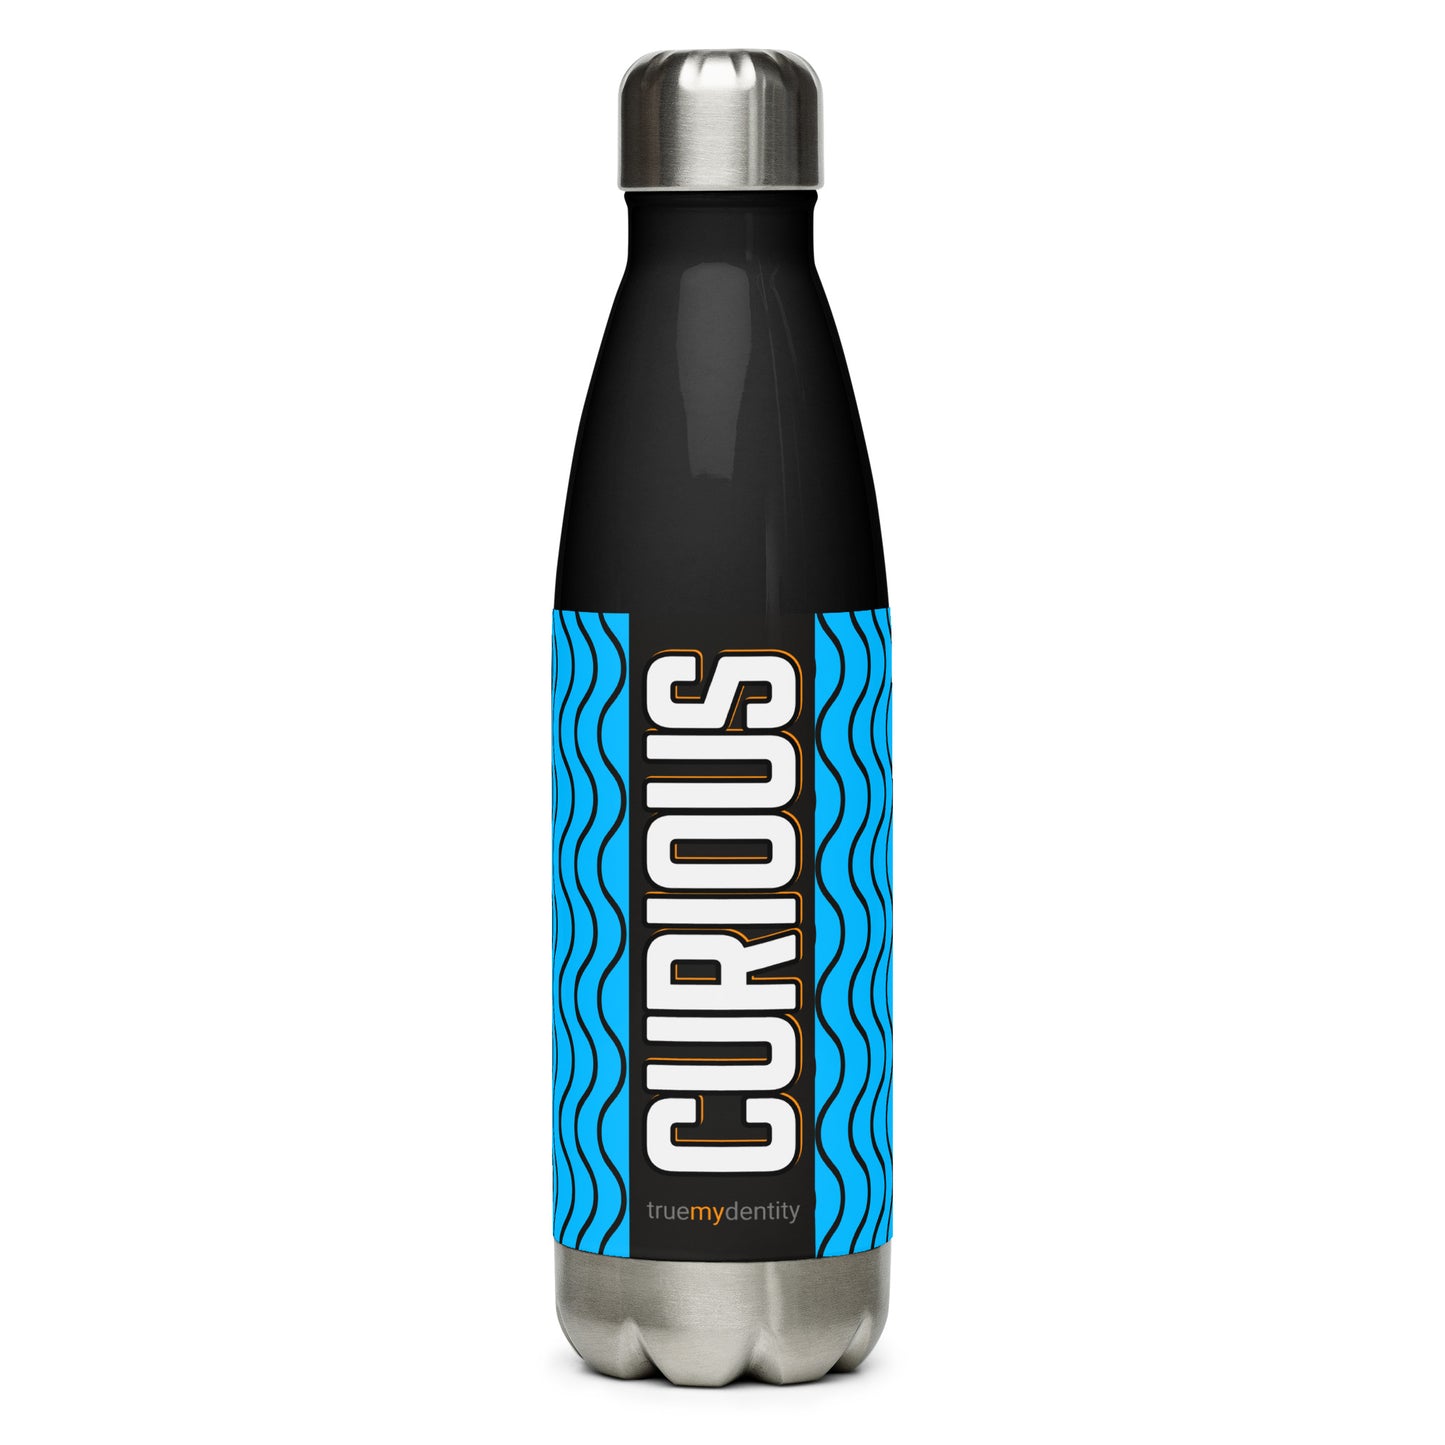 CURIOUS Stainless Steel Water Bottle Blue Wave Design, 17 oz, in Black or White